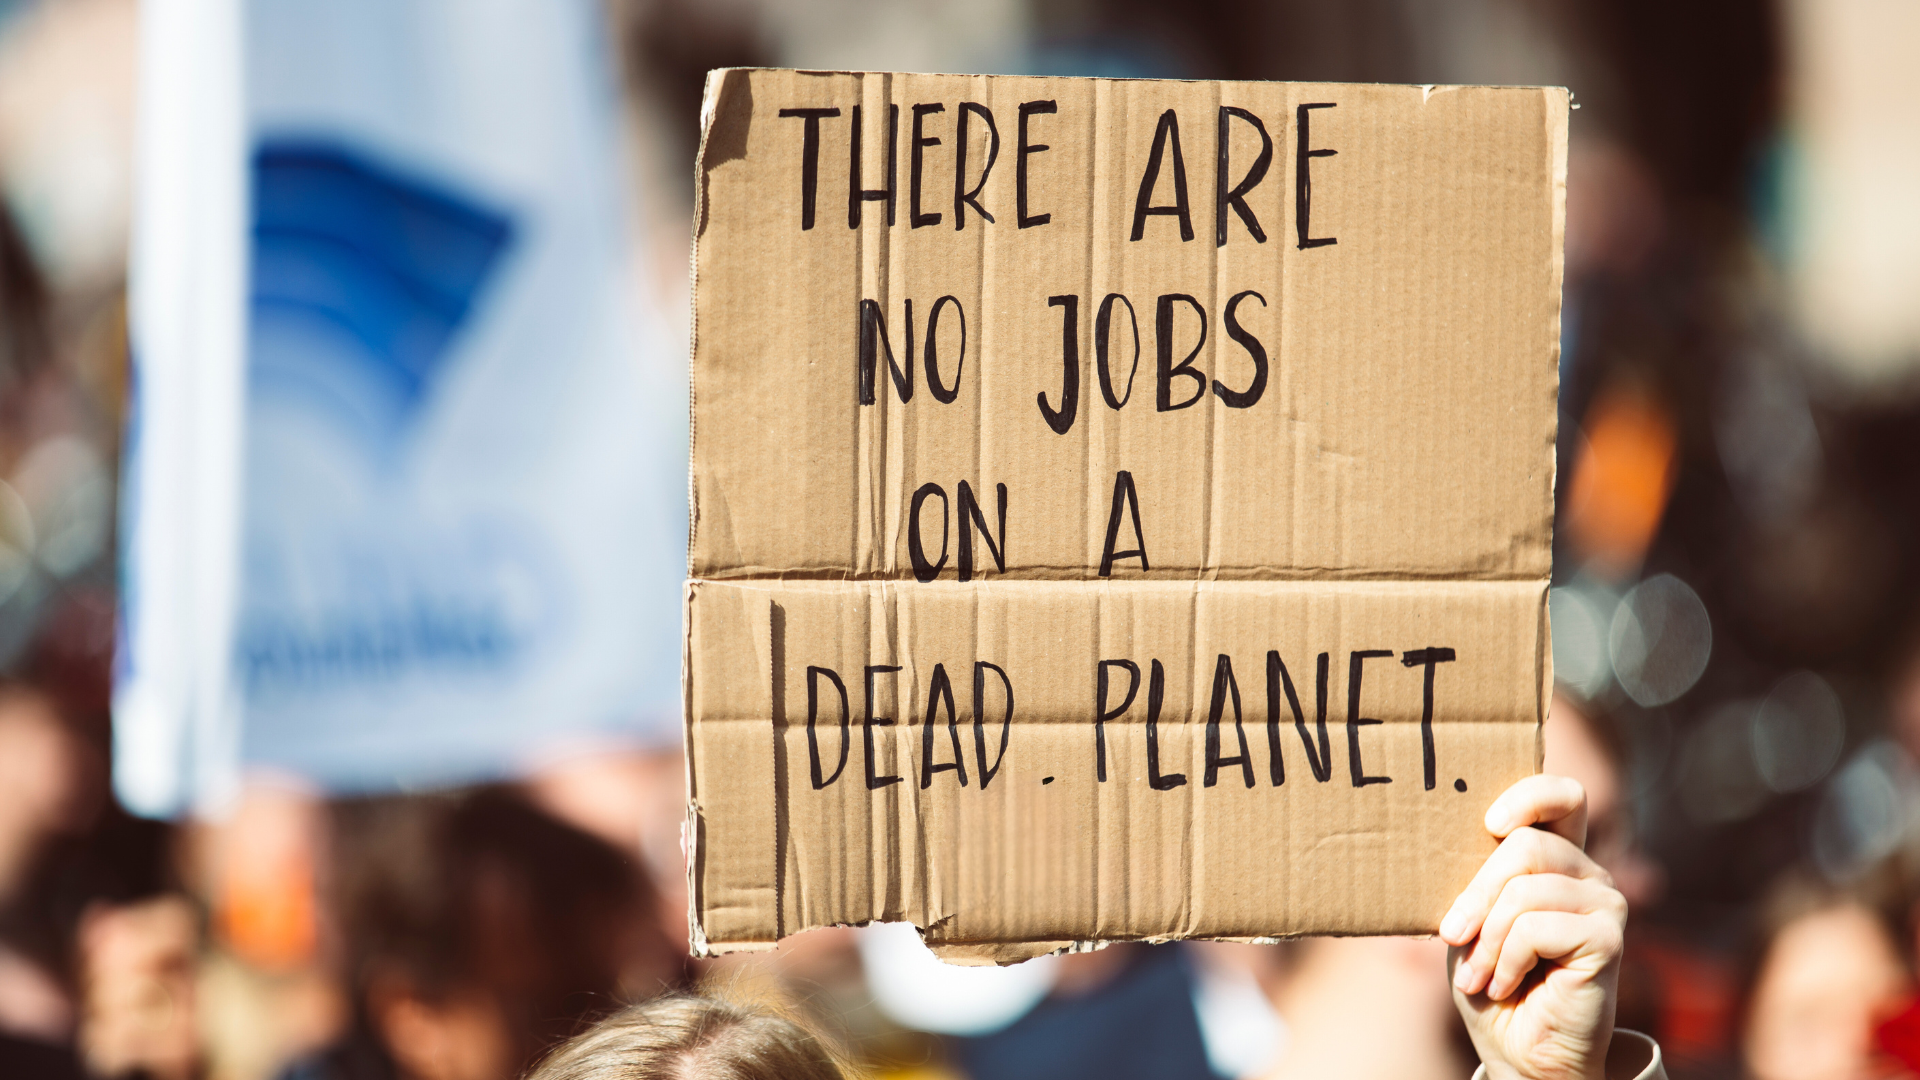 Cardboard sign that states "There are no jobs on a dead planet."